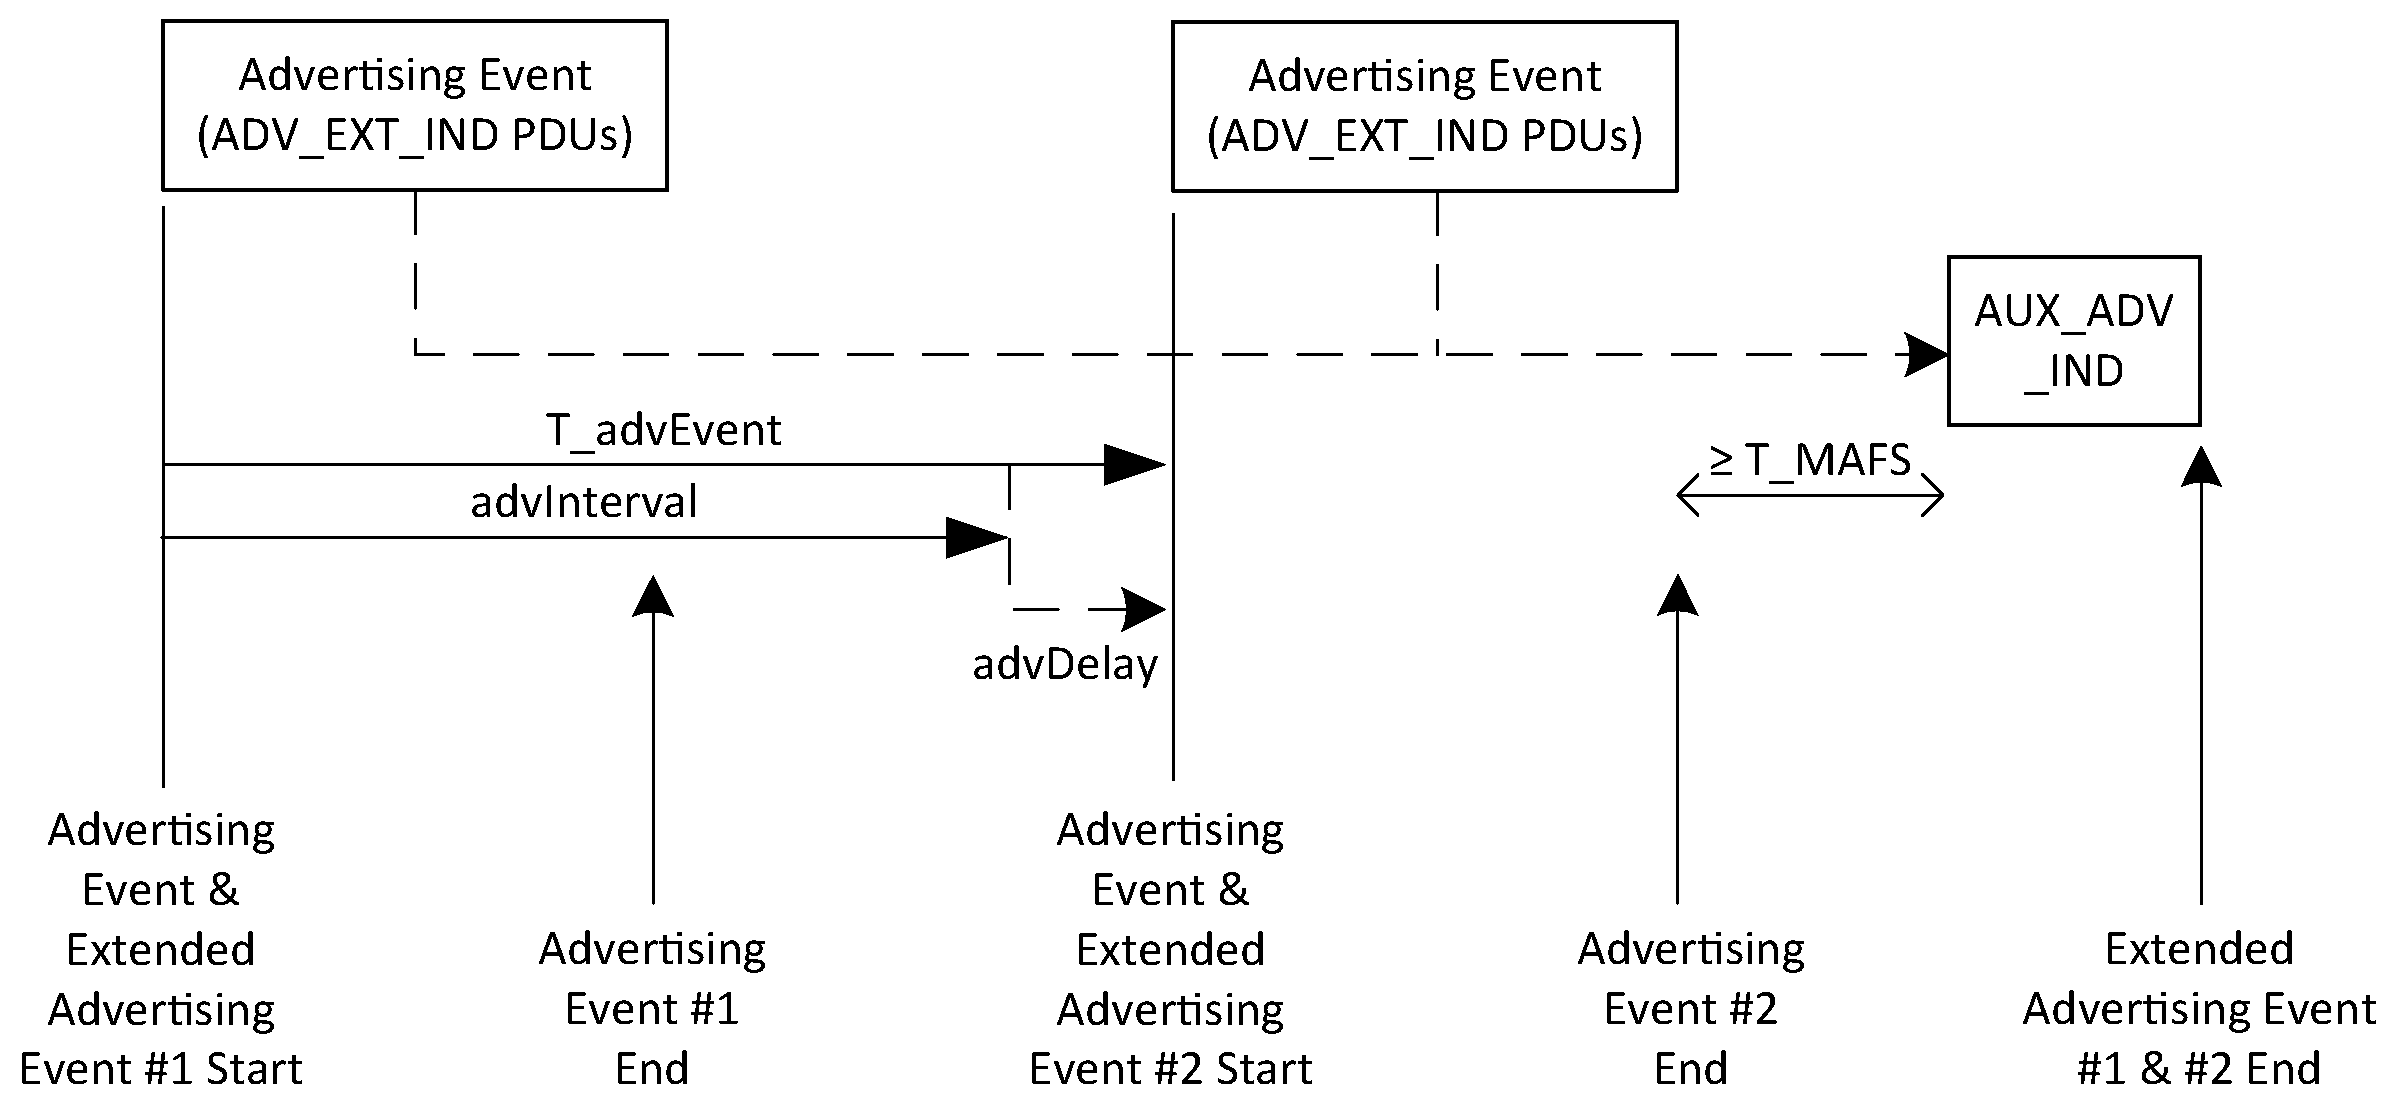 Example of overlapping extended advertising events